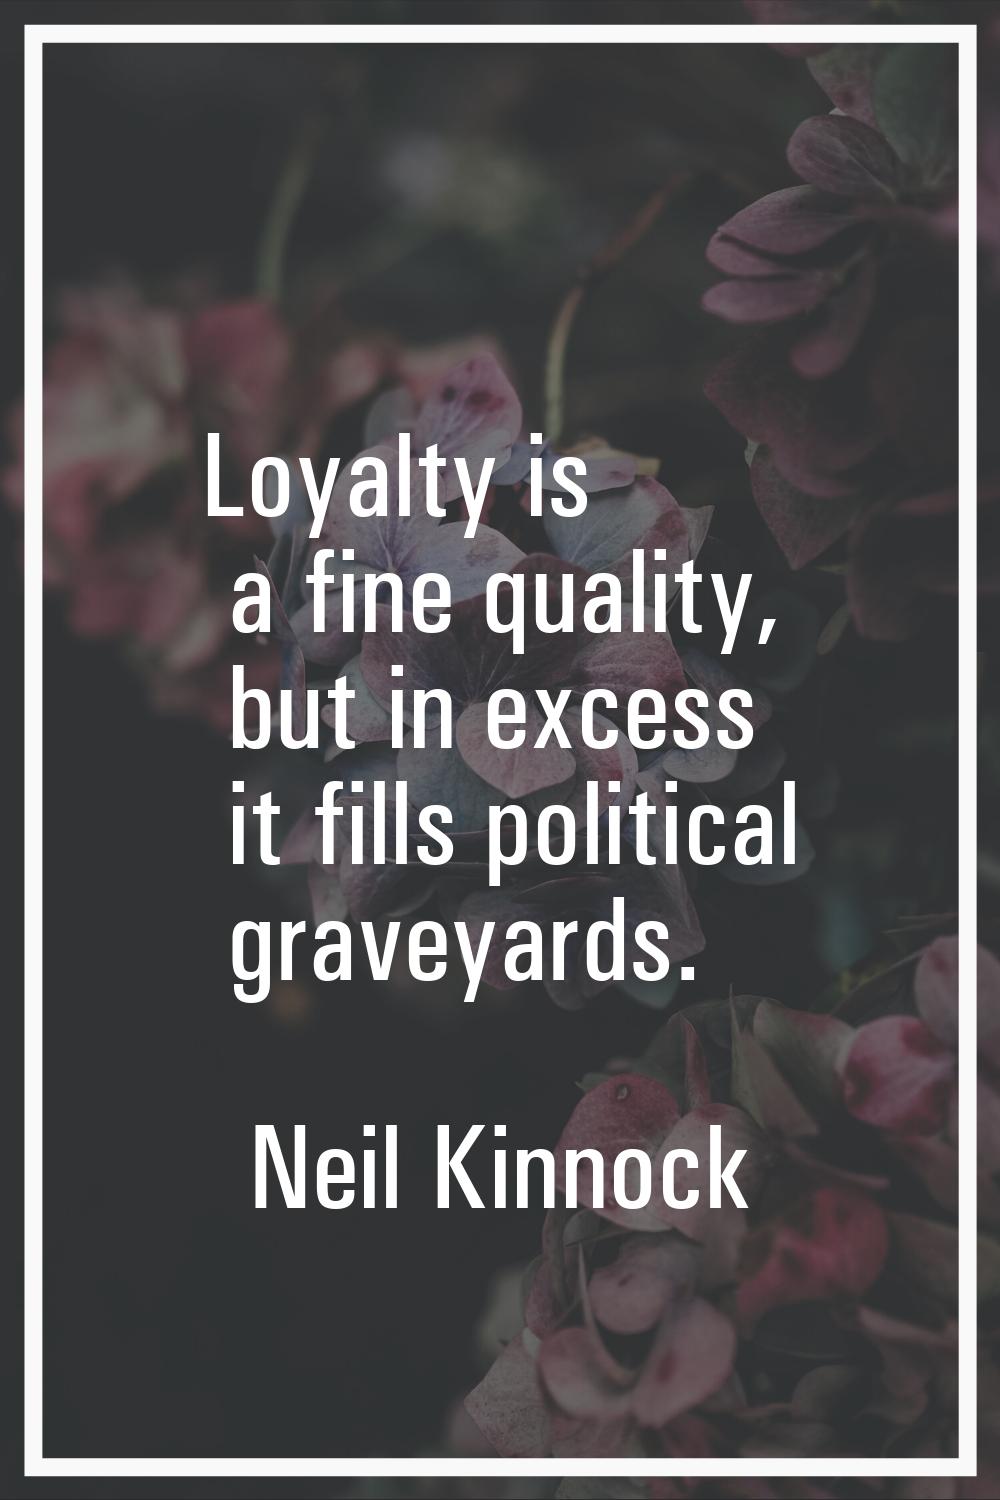 Loyalty is a fine quality, but in excess it fills political graveyards.